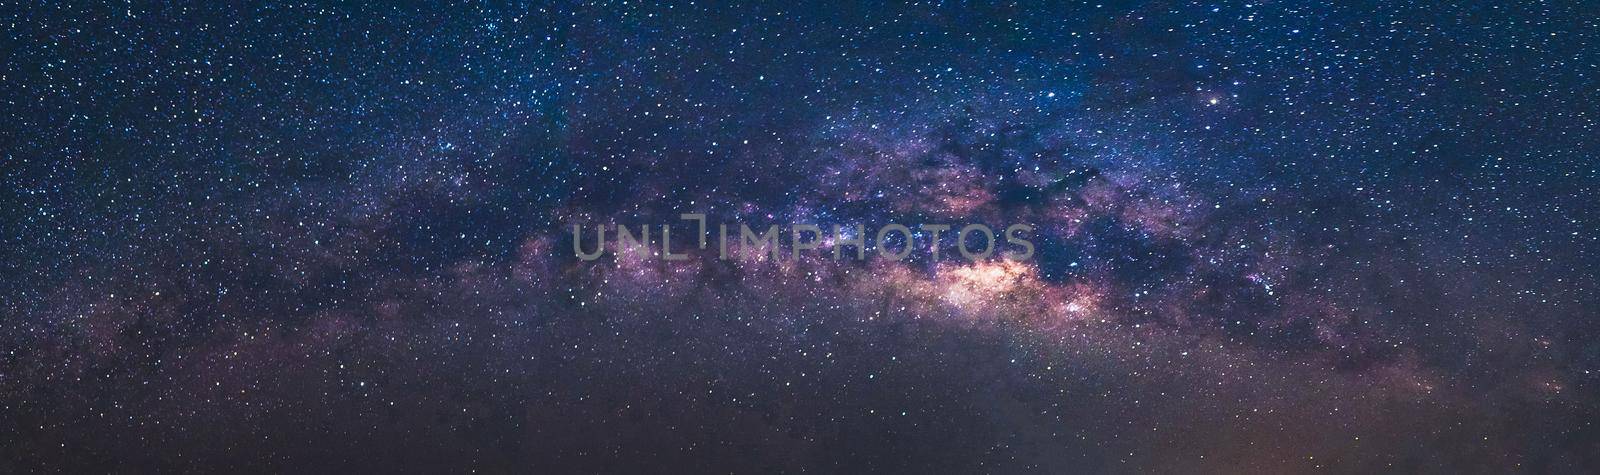 Panorama view universe space shot of milky way galaxy with stars on a night sky background.The Milky Way is the galaxy that contains our Solar System. by Nuamfolio